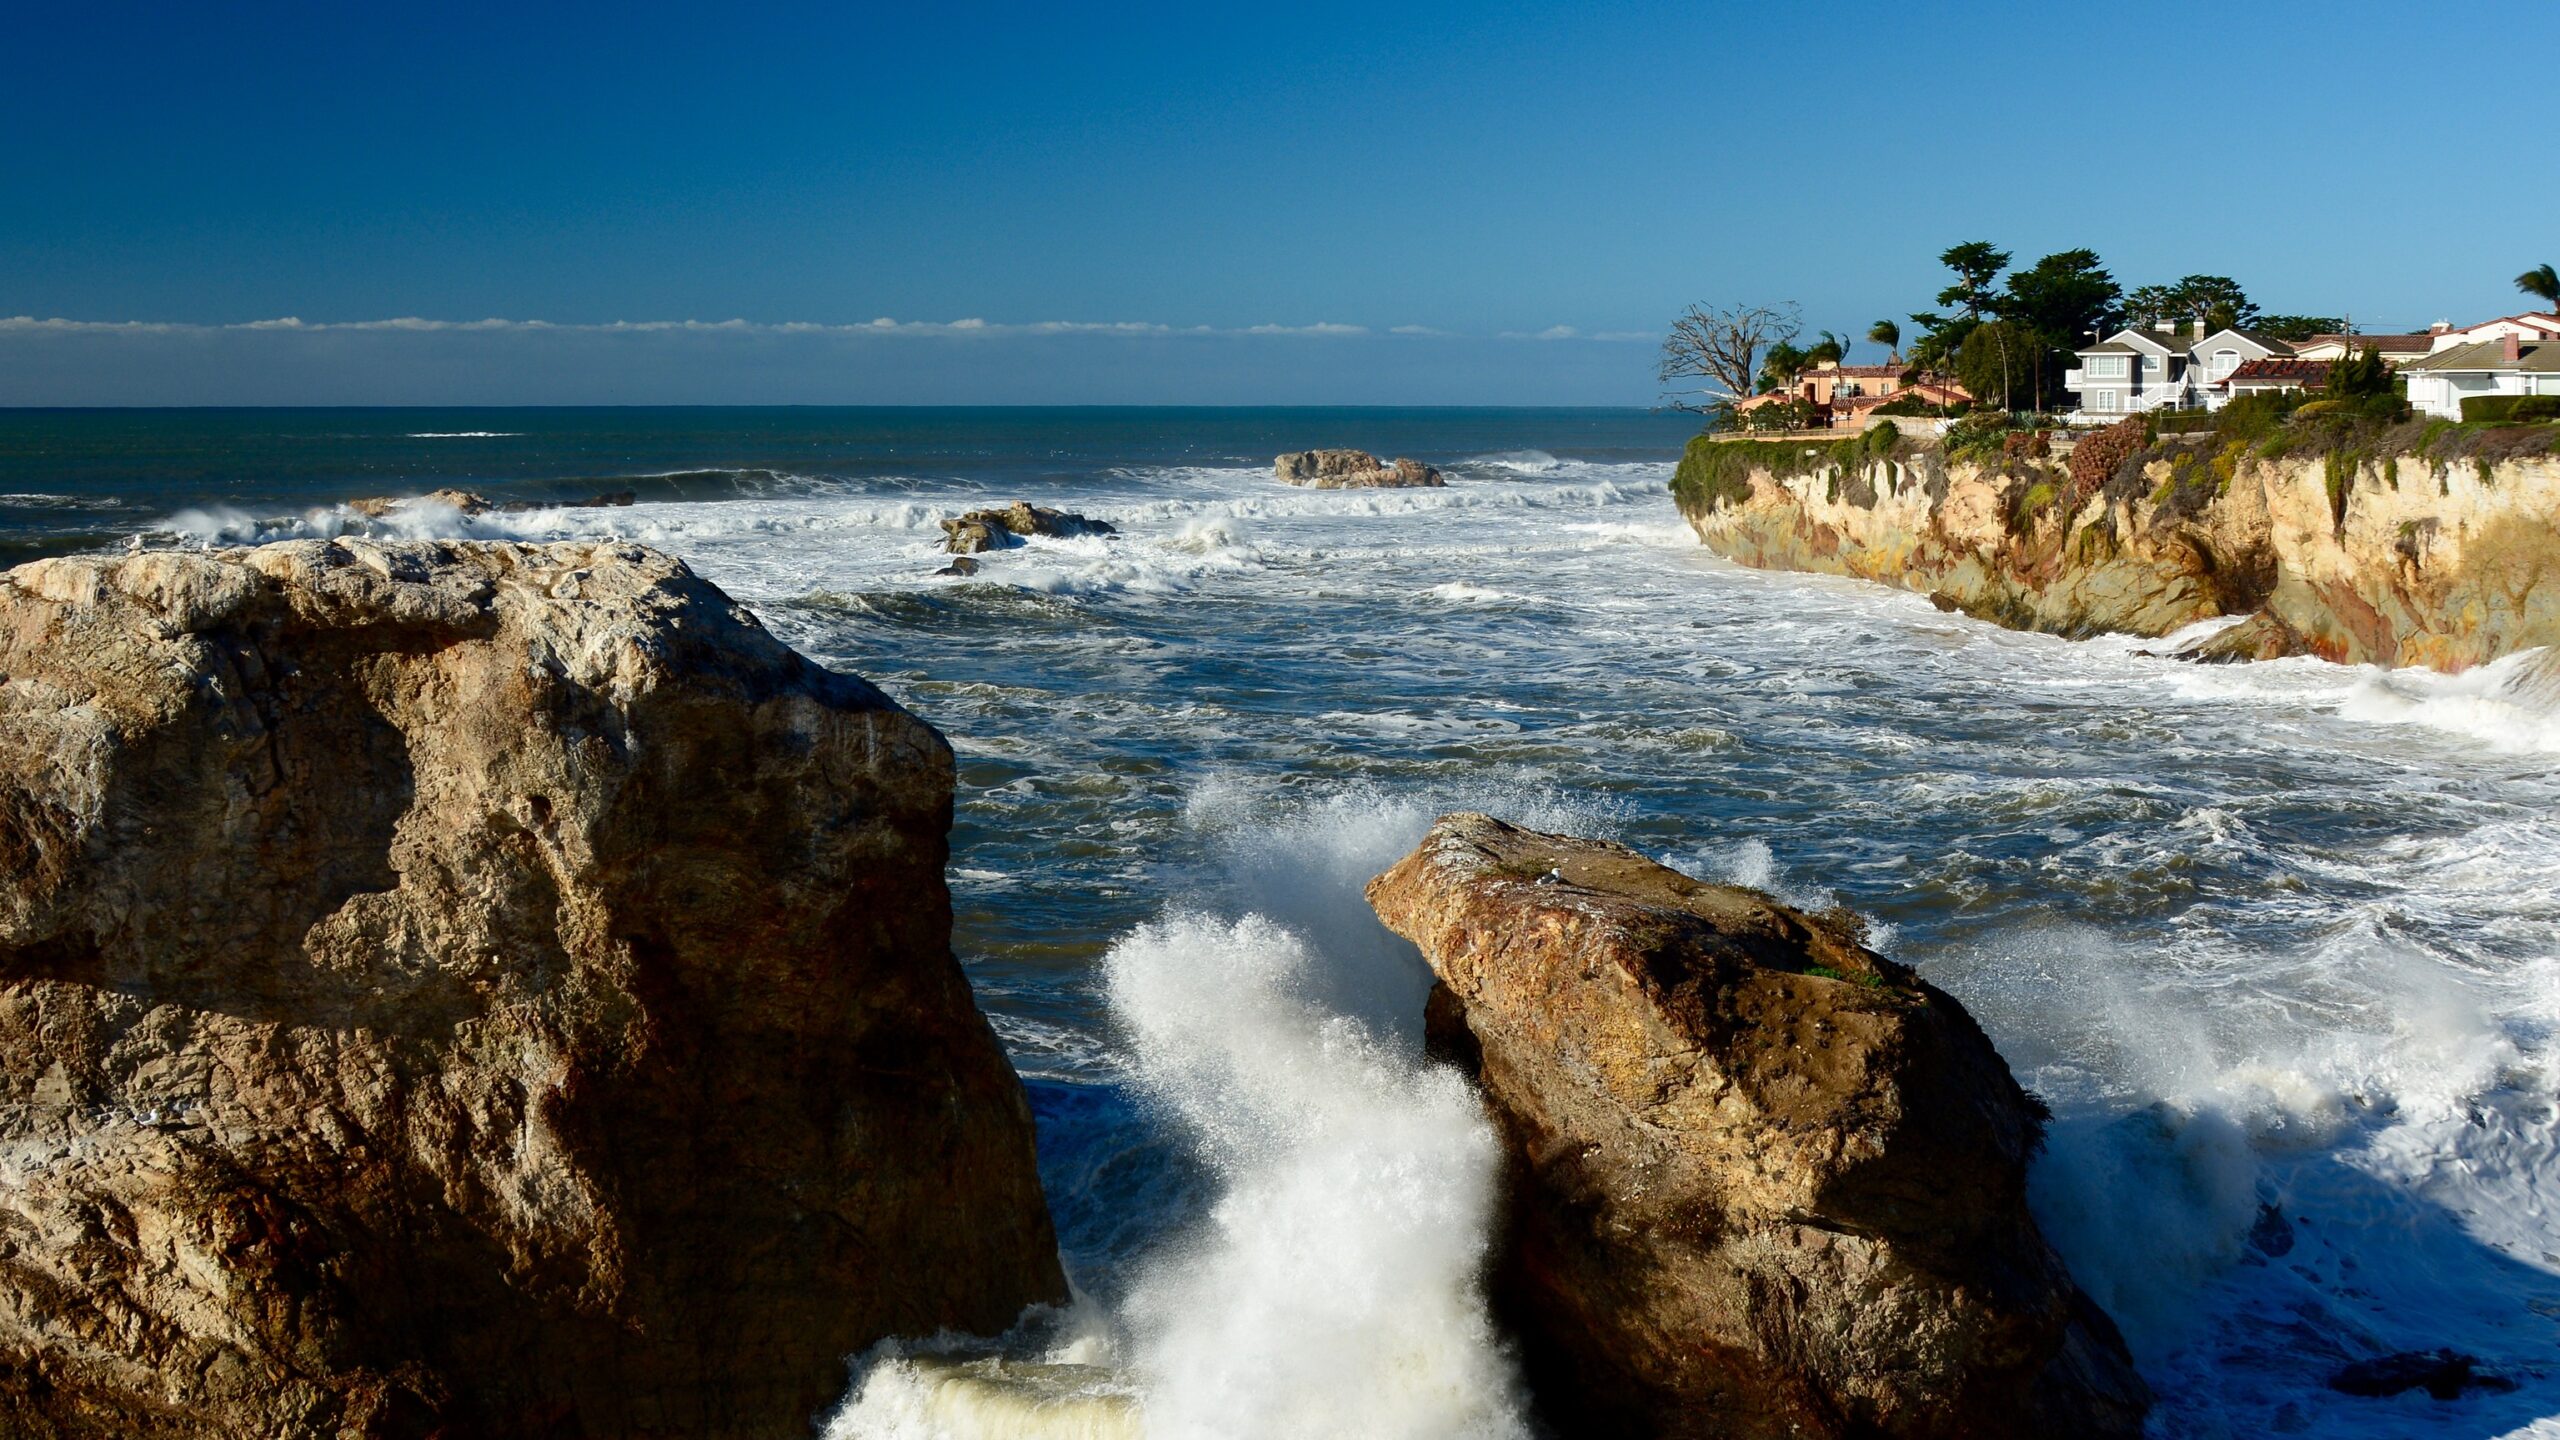 Large waves on the rocks at Shell Beach, California